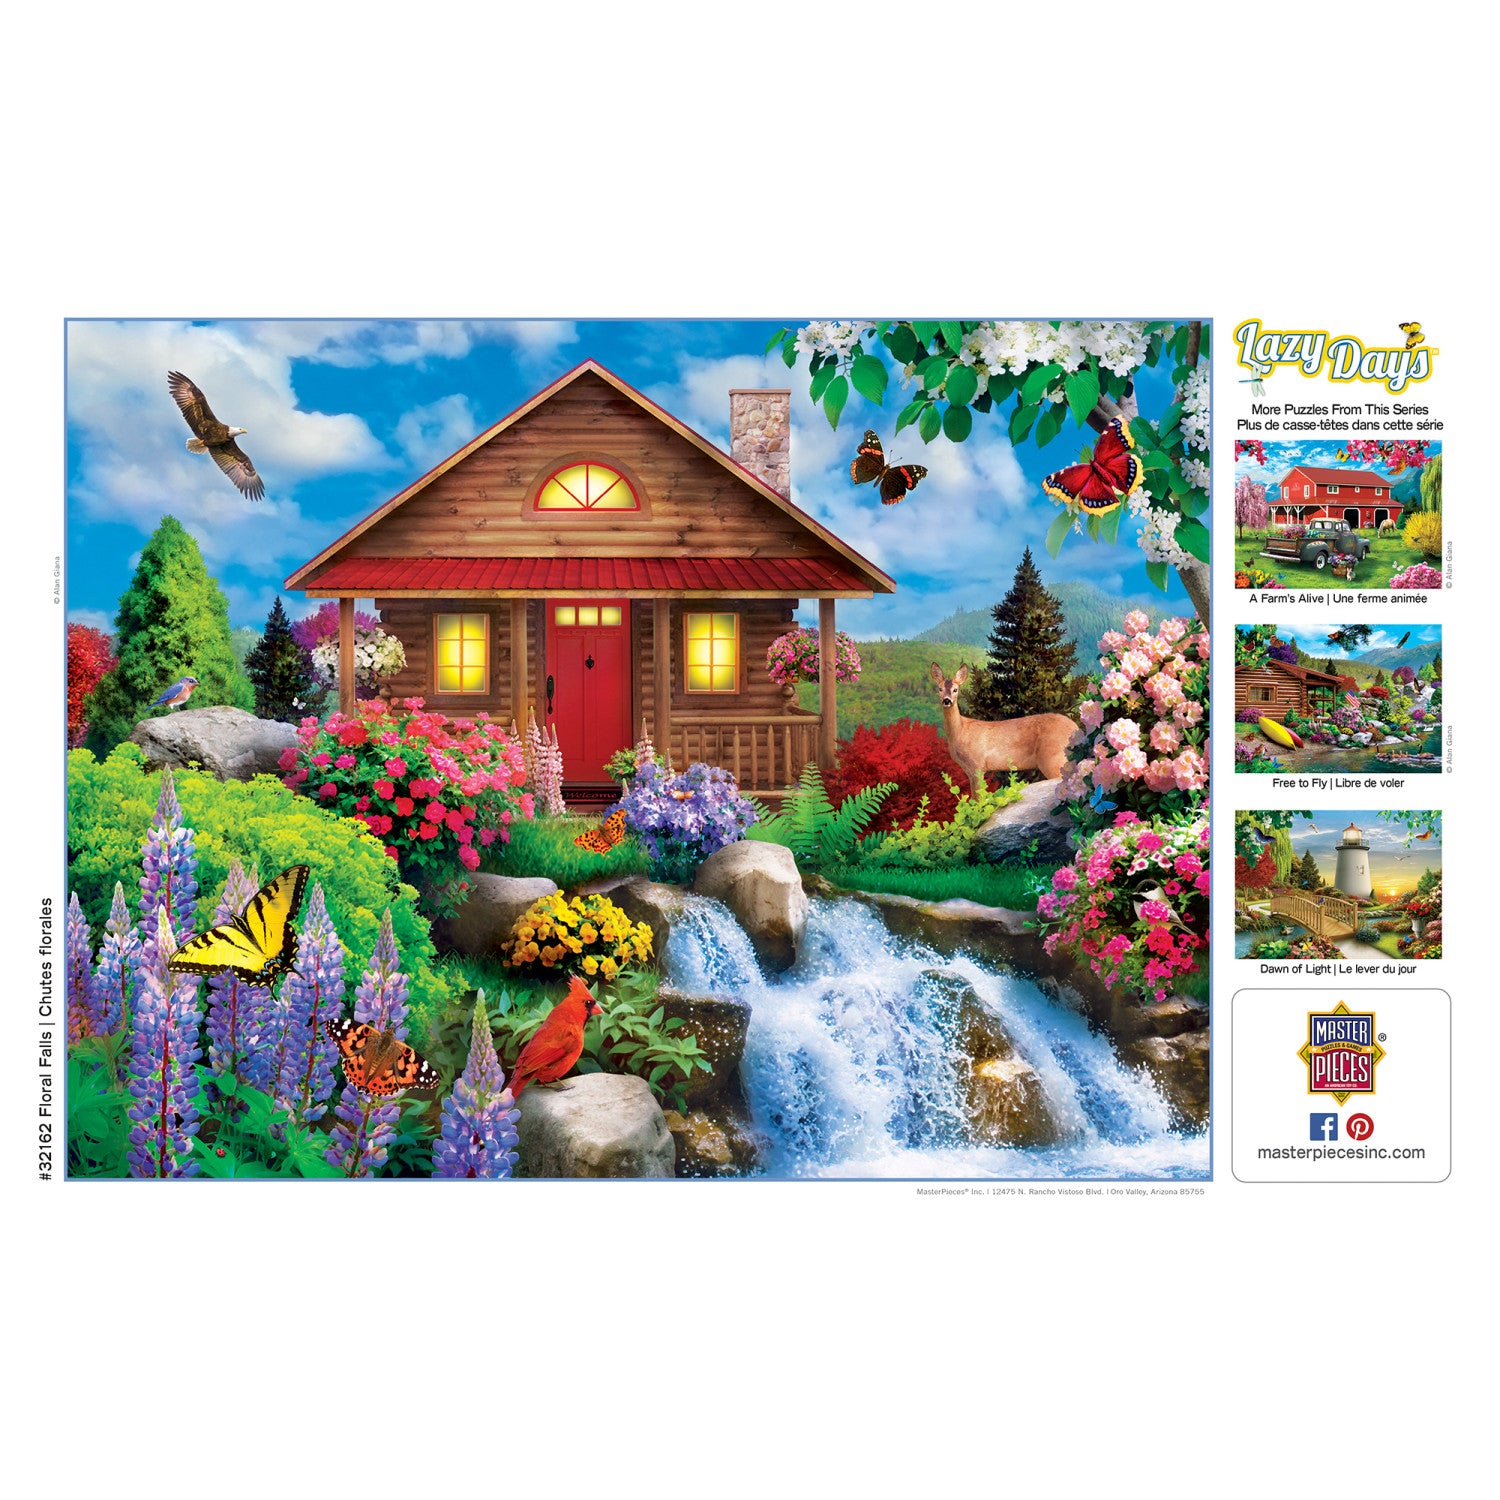 Lazy Days - Floral Falls 750 Piece Puzzle By Alan Giana